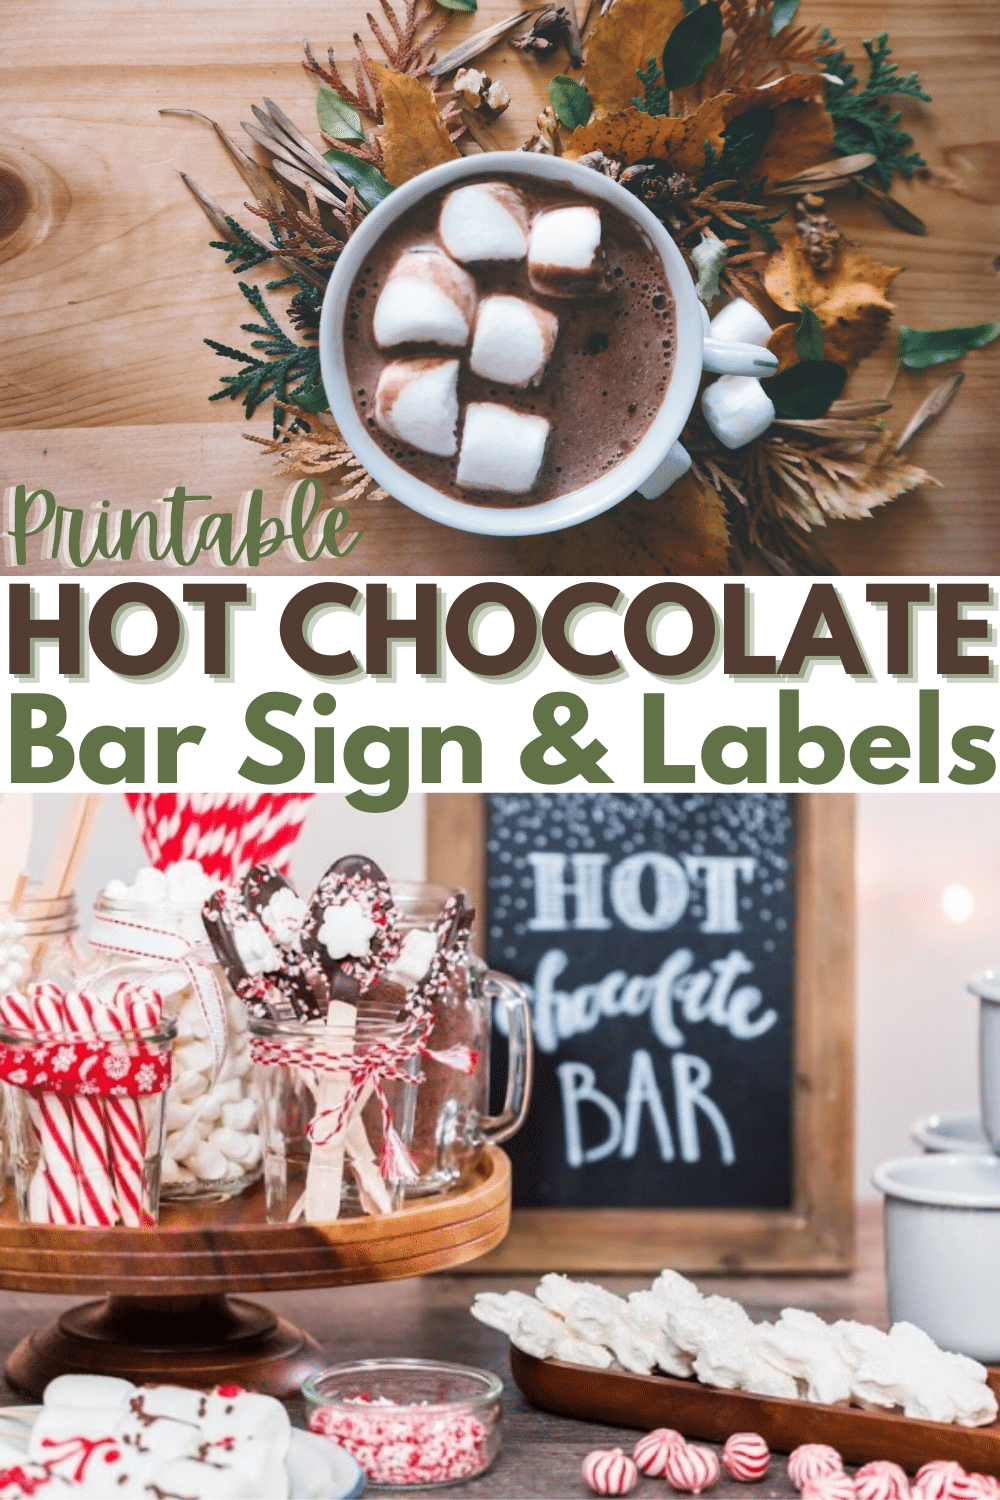 This printable hot chocolate bar sign and labels will help you hot cocoa bar stay organized and will help guests make the best mug of cocoa ever. #hotchocolate #hotcocoa #printables via @wondermomwannab